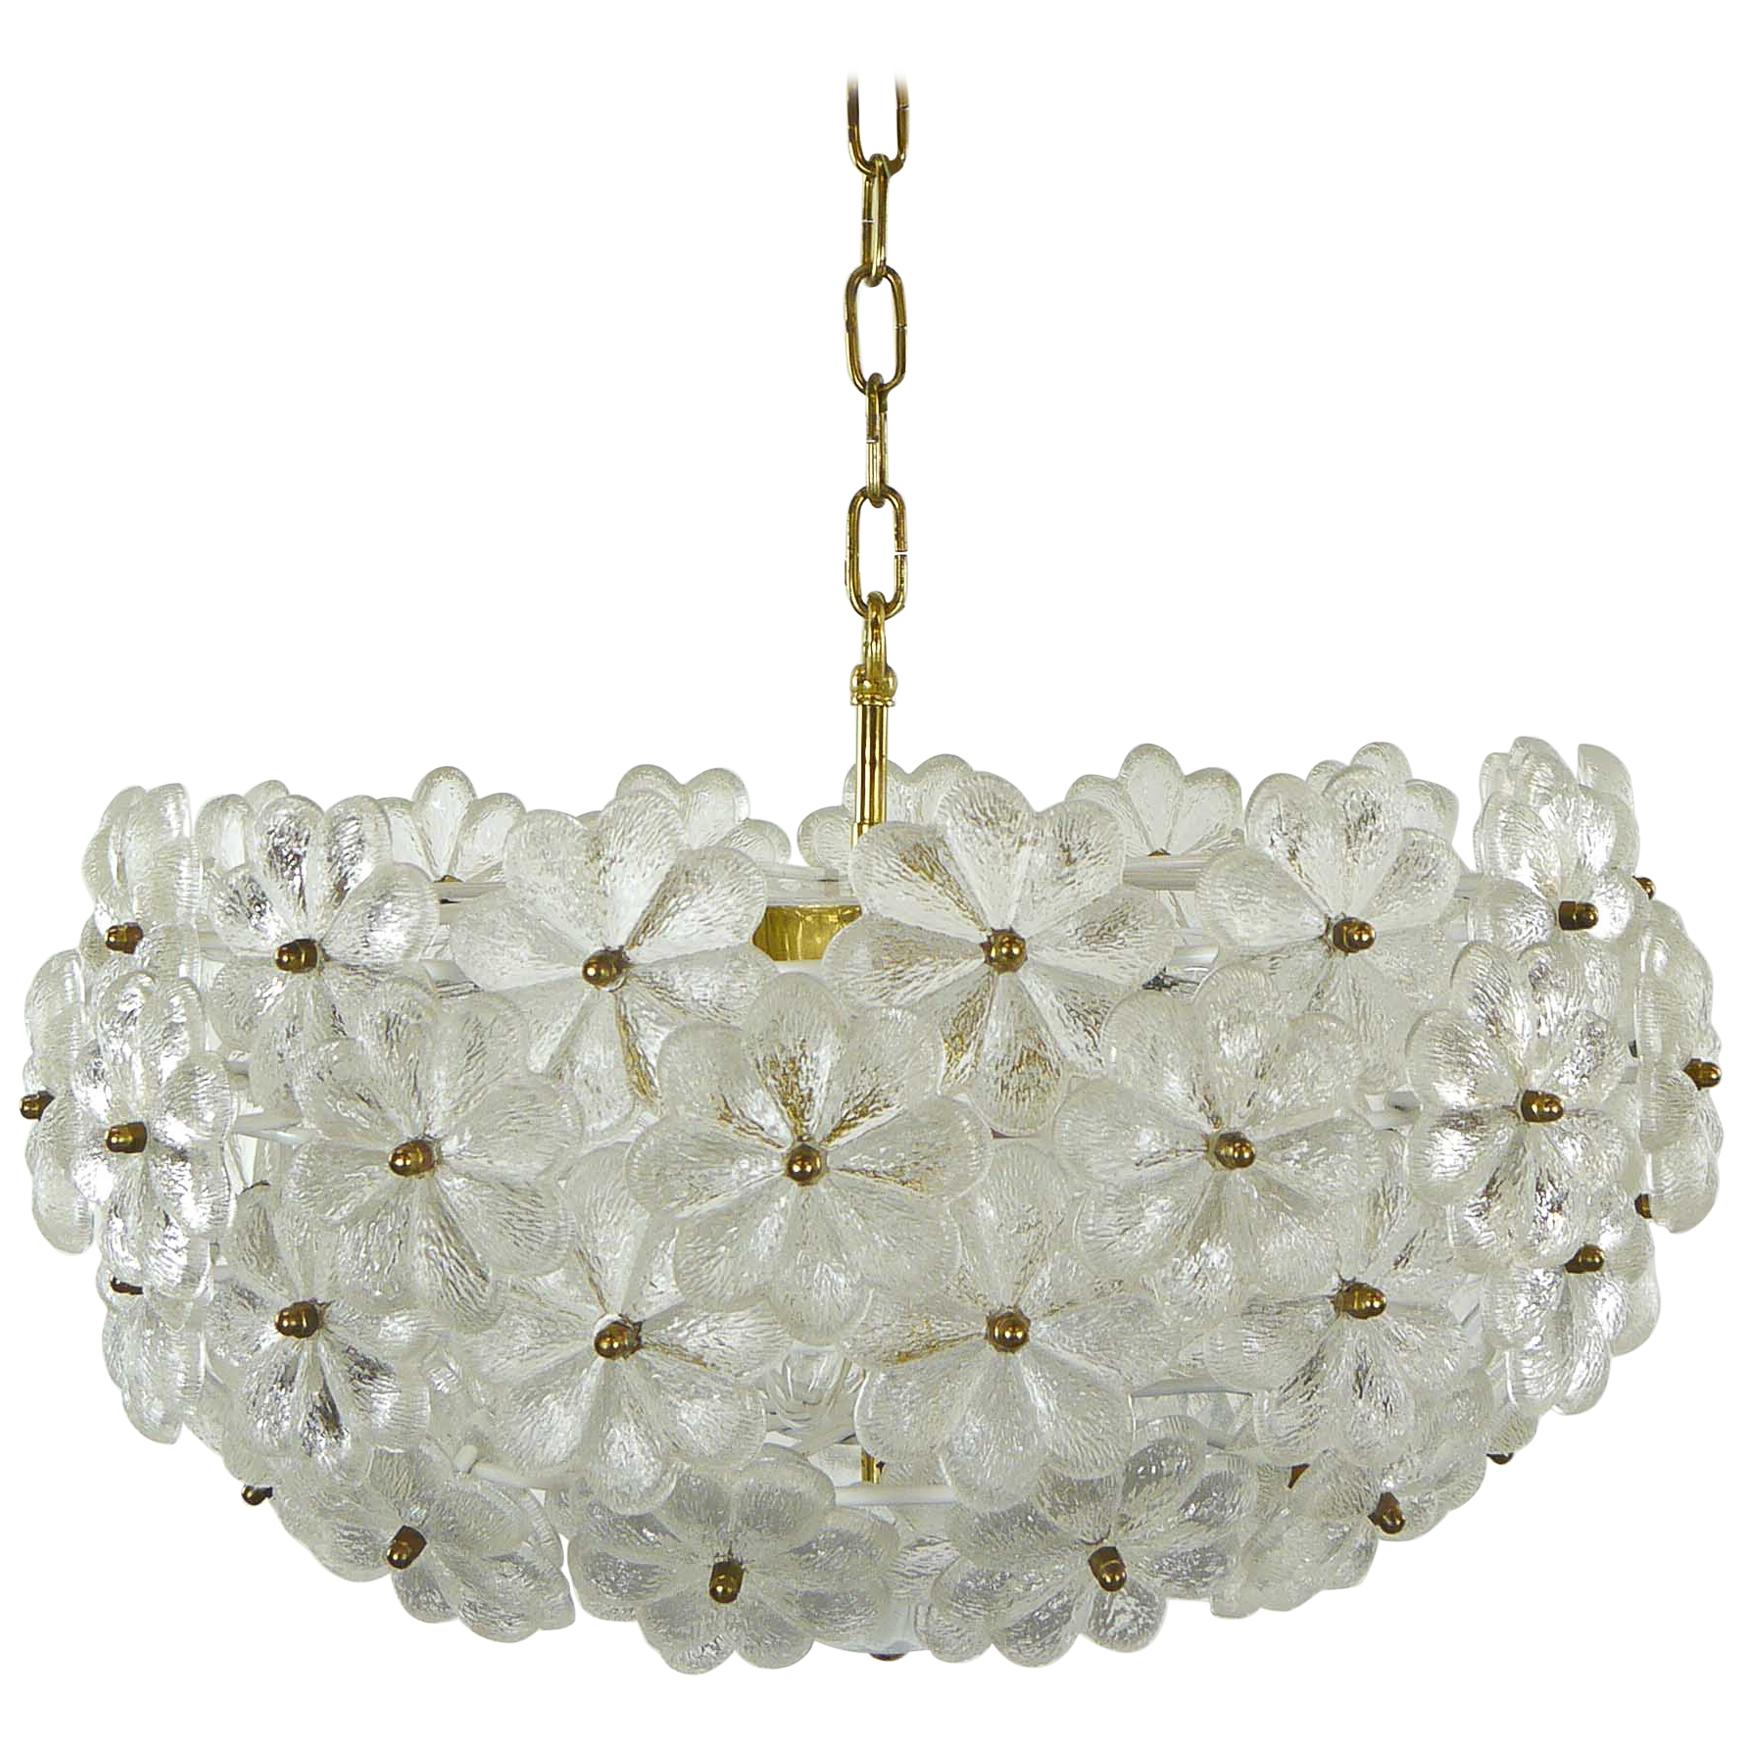 Midcentury Large and Stunning Glass Chandelier by Ernst Palme Glassflowers 60s 